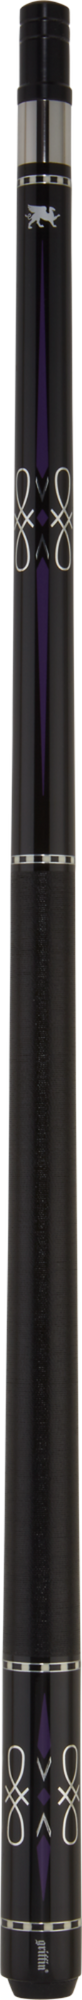 Griffin Griffin GR62 Pool Cue Pool Cue